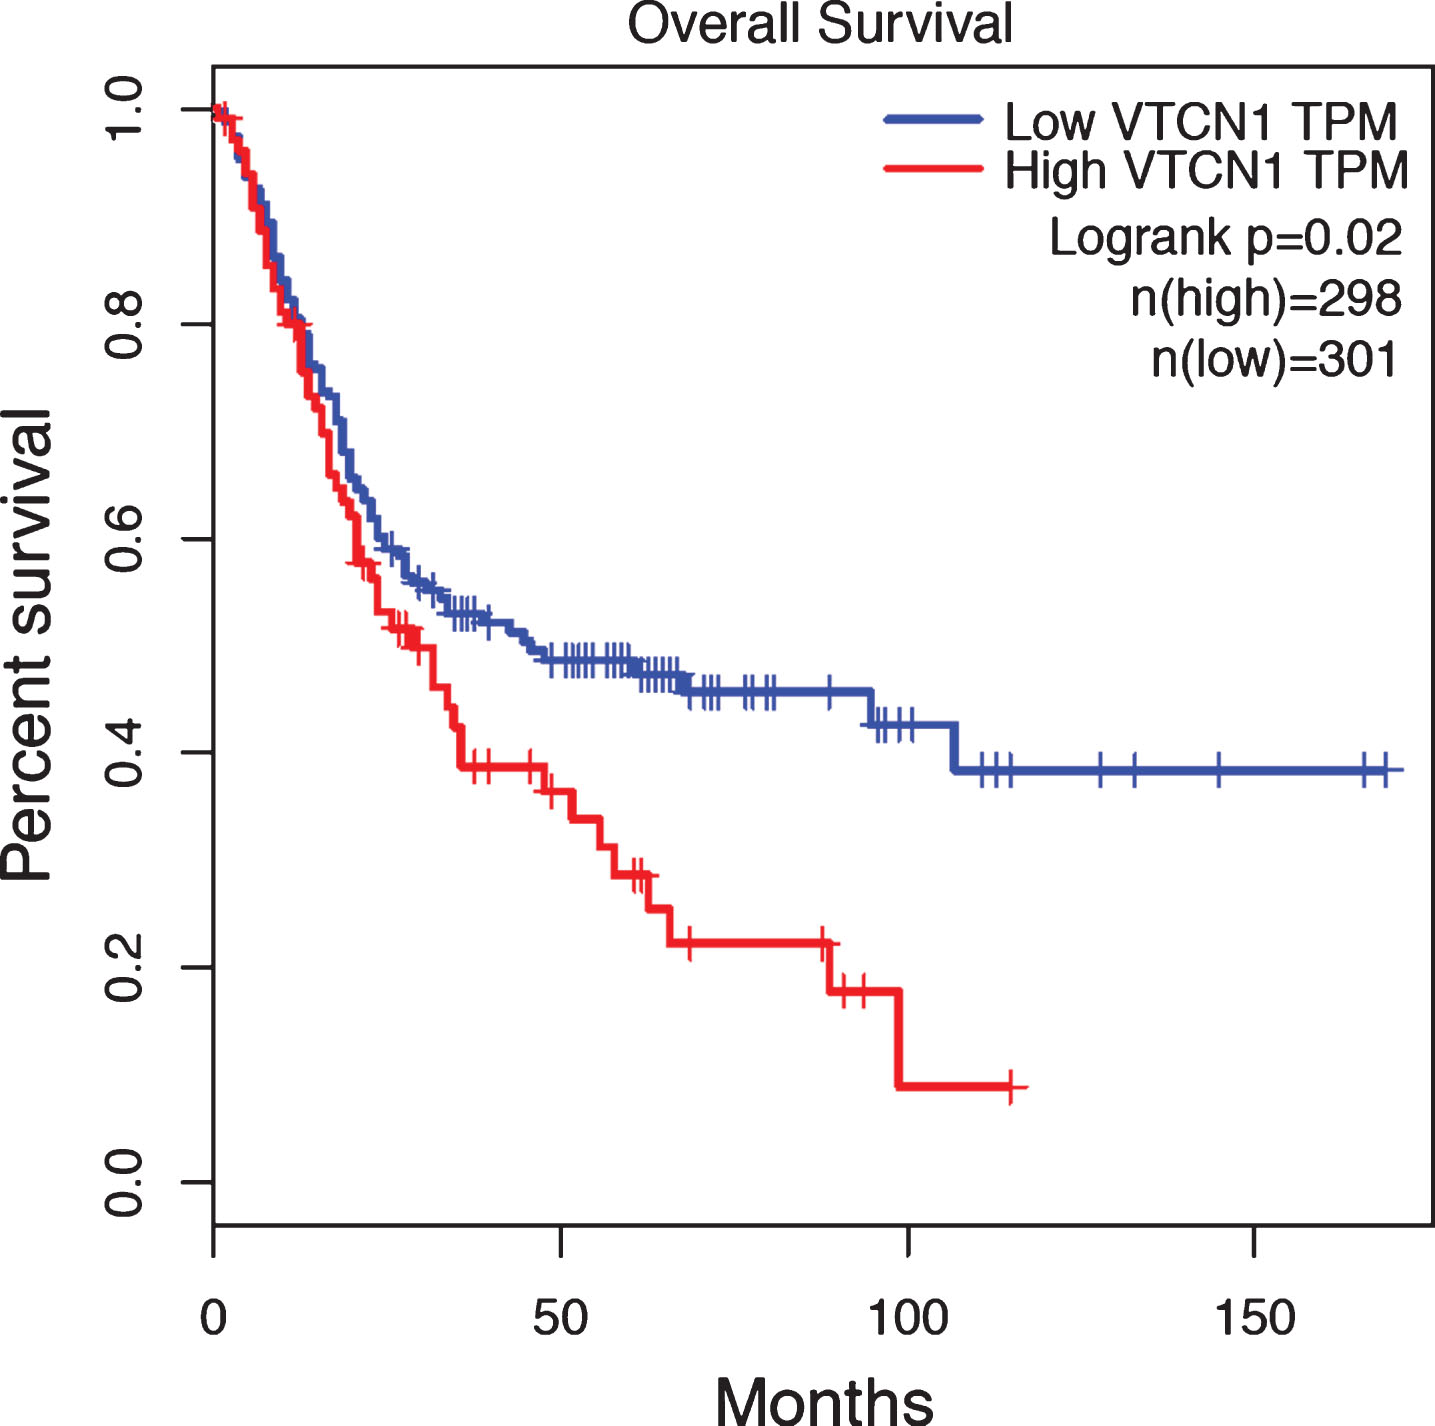 B7x mRNA expression was associated with poor overall survival in human bladder urothelial carcinoma. B7x mRNA in TCGA and GTEx datasets of human bladder urothelial carcinoma was analyzed using Gene Expression Profiling Interactive Analysis. The B7x high group (top 25%, N = 298) indicated in red showed a significant worse overall survival than the B7x low group (the rest 75%, N = 301) in blue, p = 0.02.